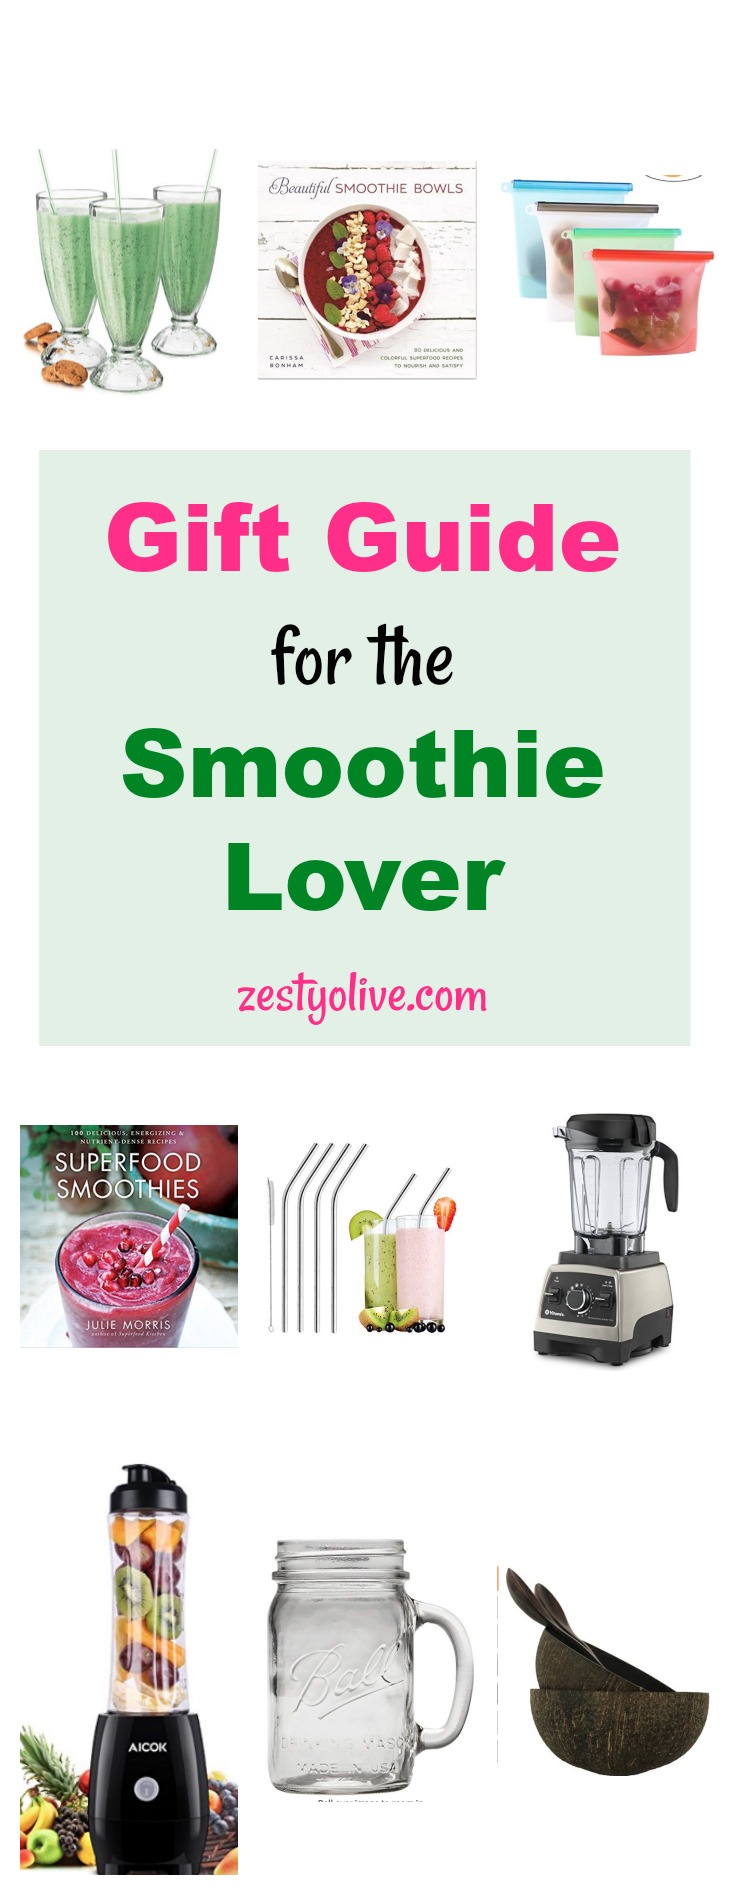 http://zestyolive.com/wp-content/uploads/2017/12/gift-guide-smoothie-lover-4.jpg